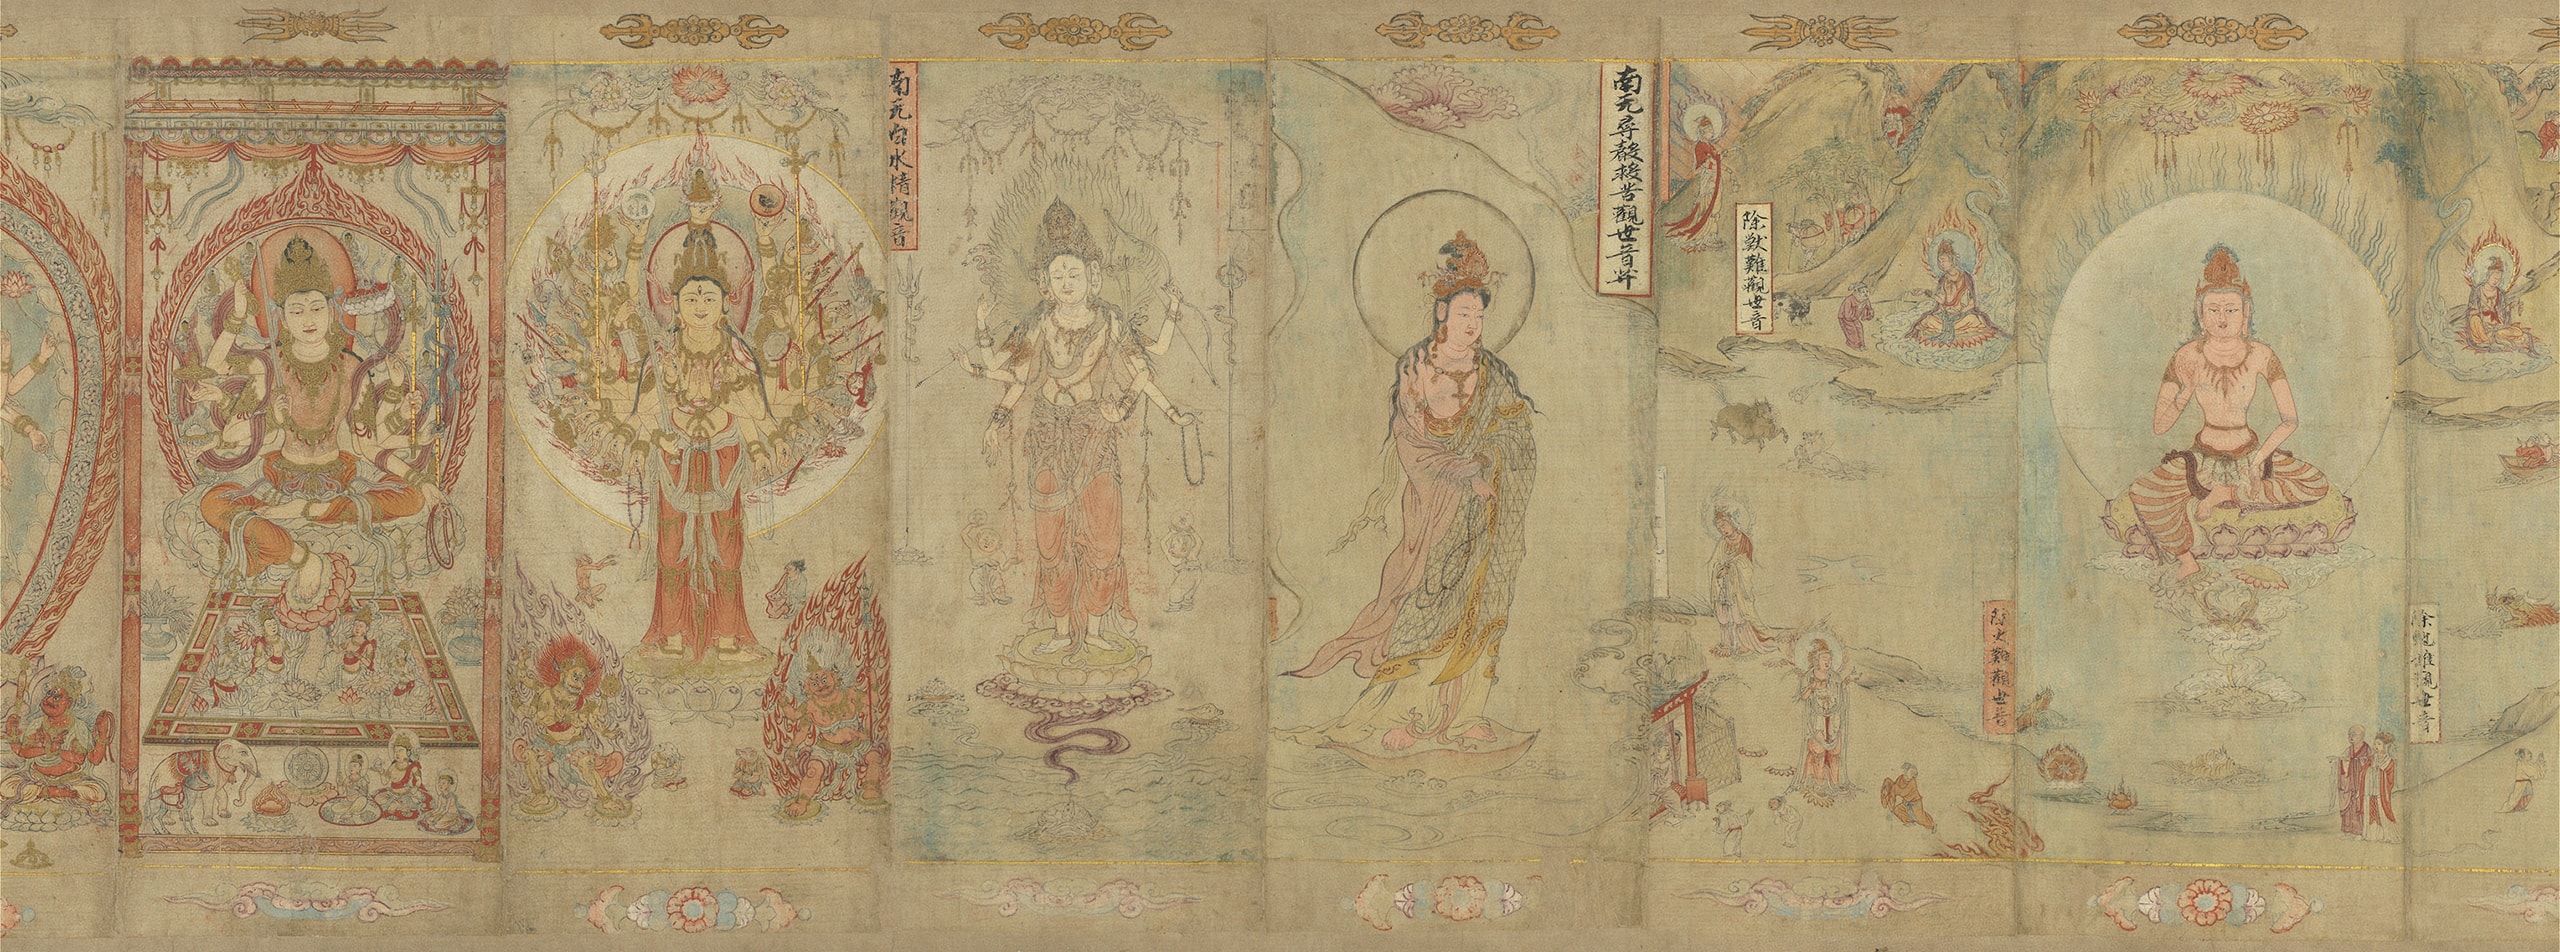 Scroll of Buddhist Images